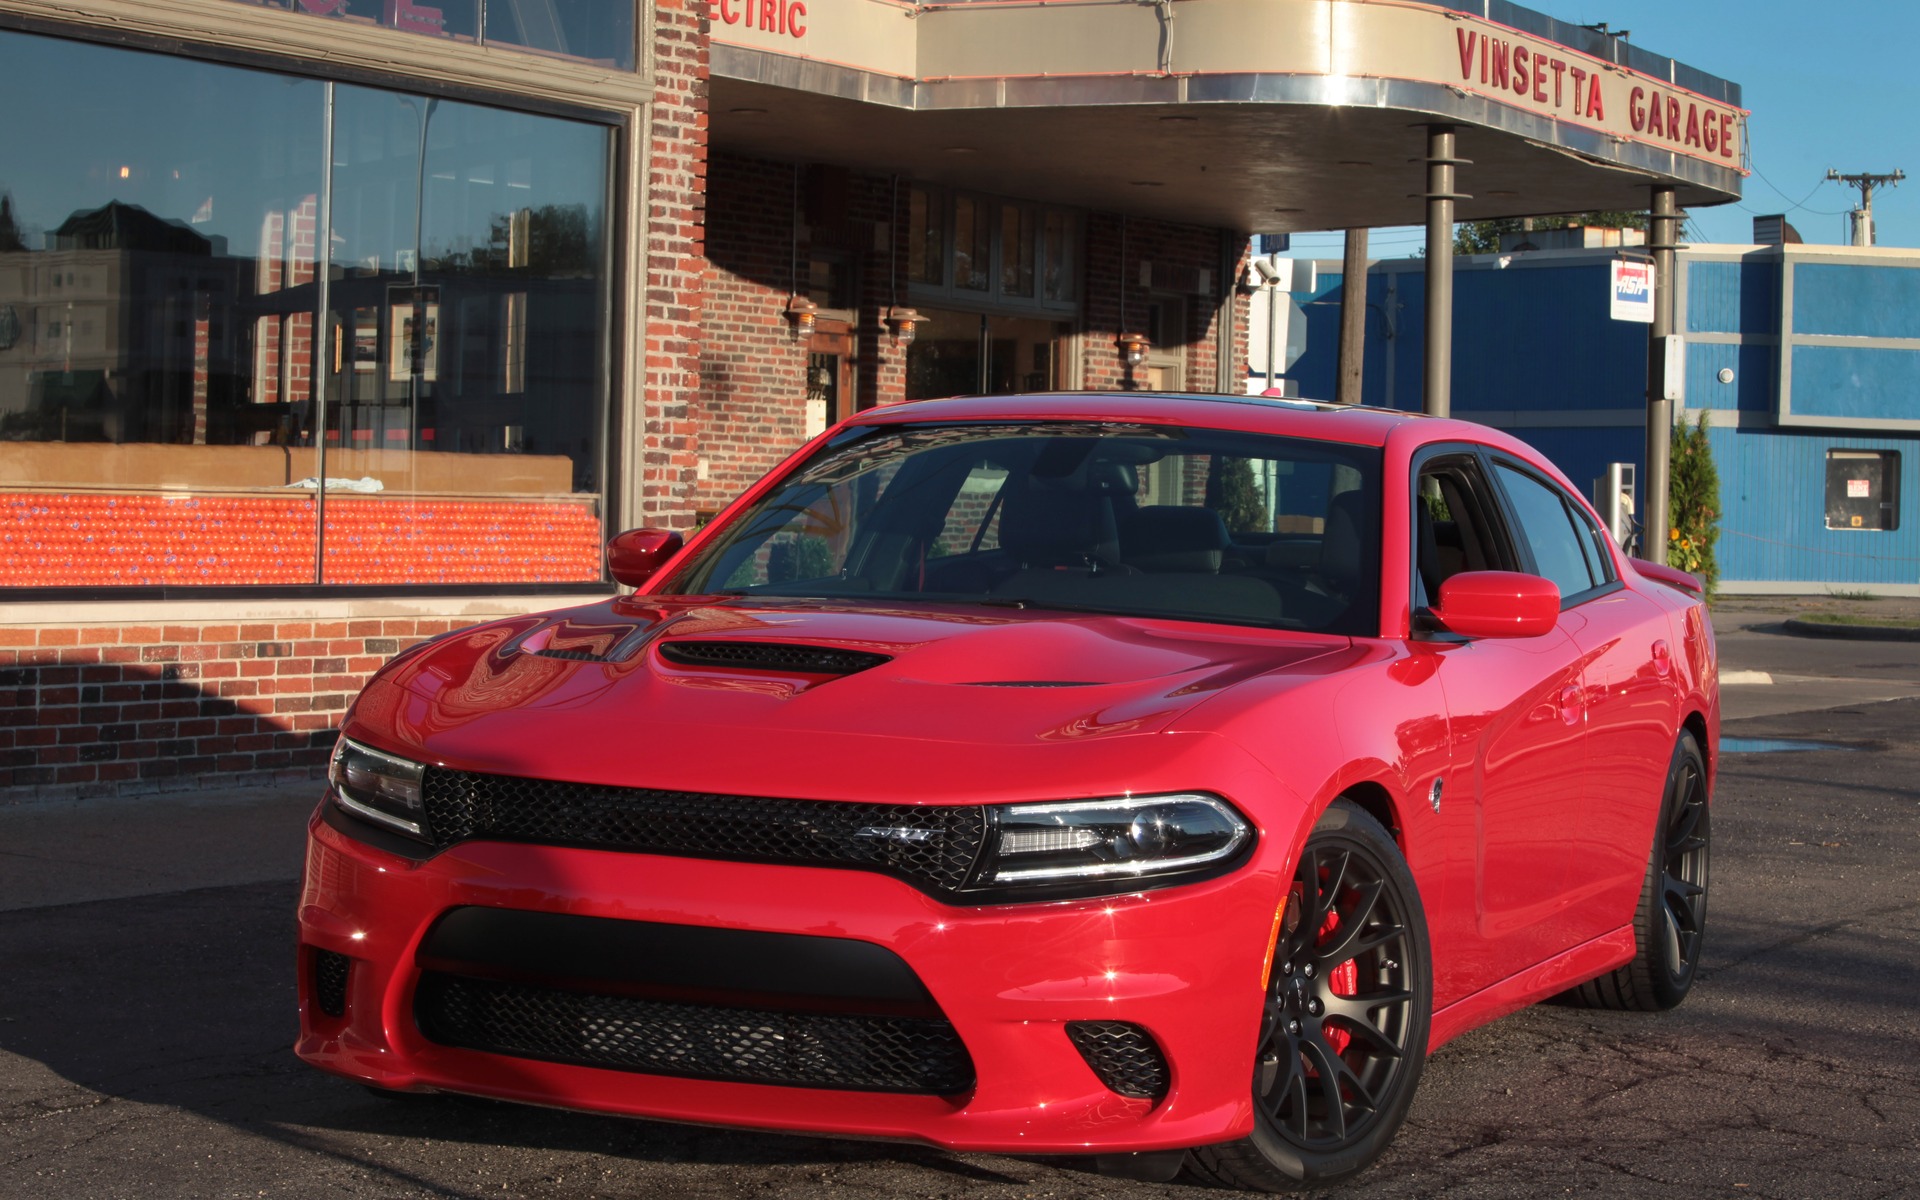 Dodge Charger Hellcat 2016 - 702 chevaux pour environ 75,000 dollars...